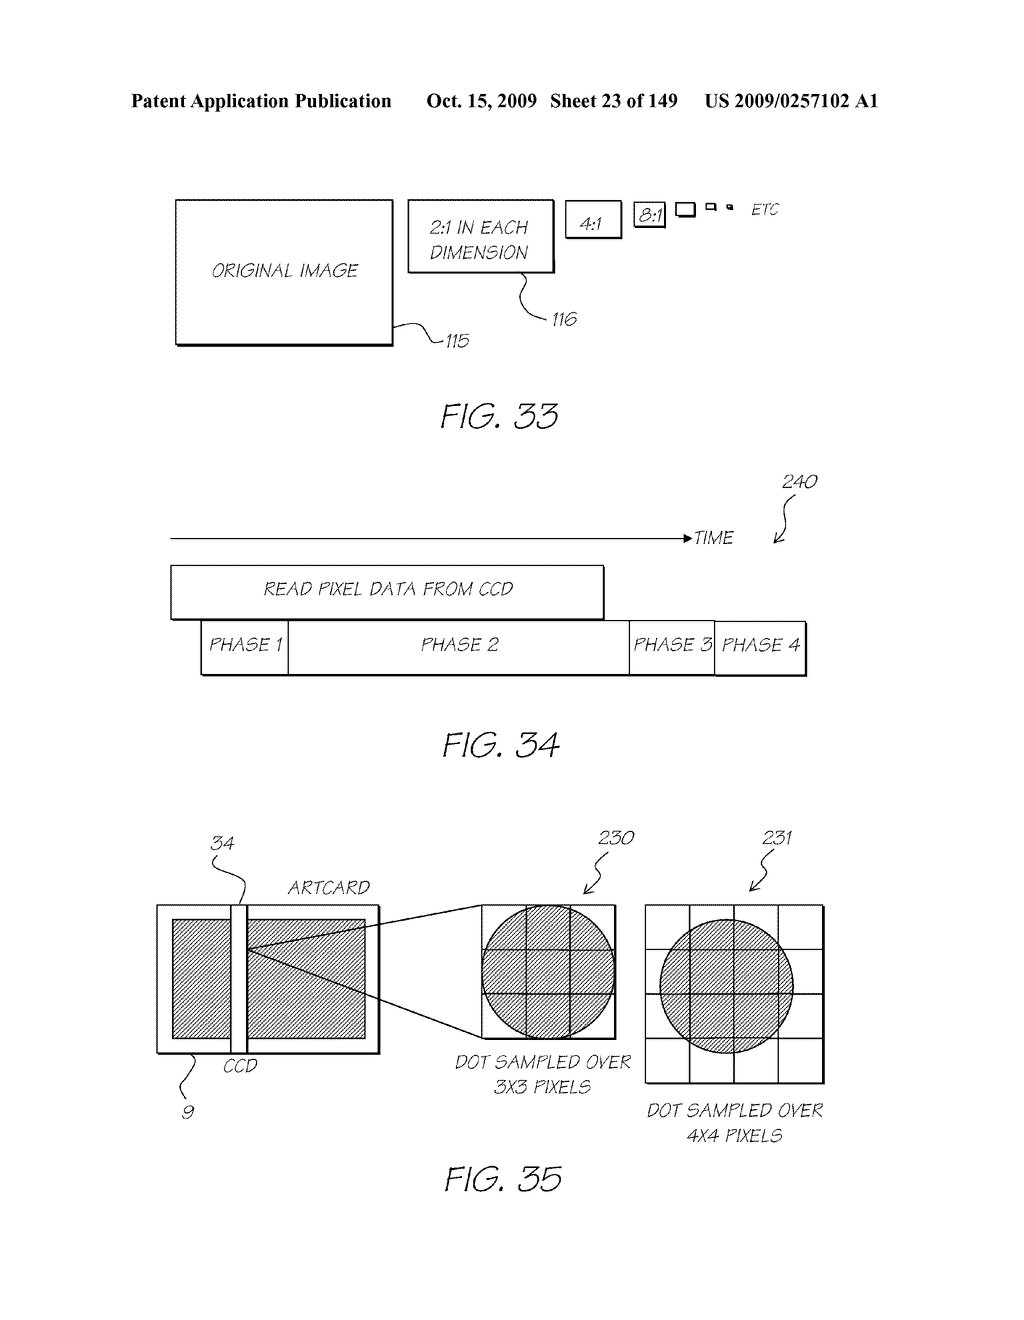 IMAGE PROCESSING APPARATUS HAVING CARD READER FOR APPLYING EFFECTS STORED ON A CARD TO A STORED IMAGE - diagram, schematic, and image 24